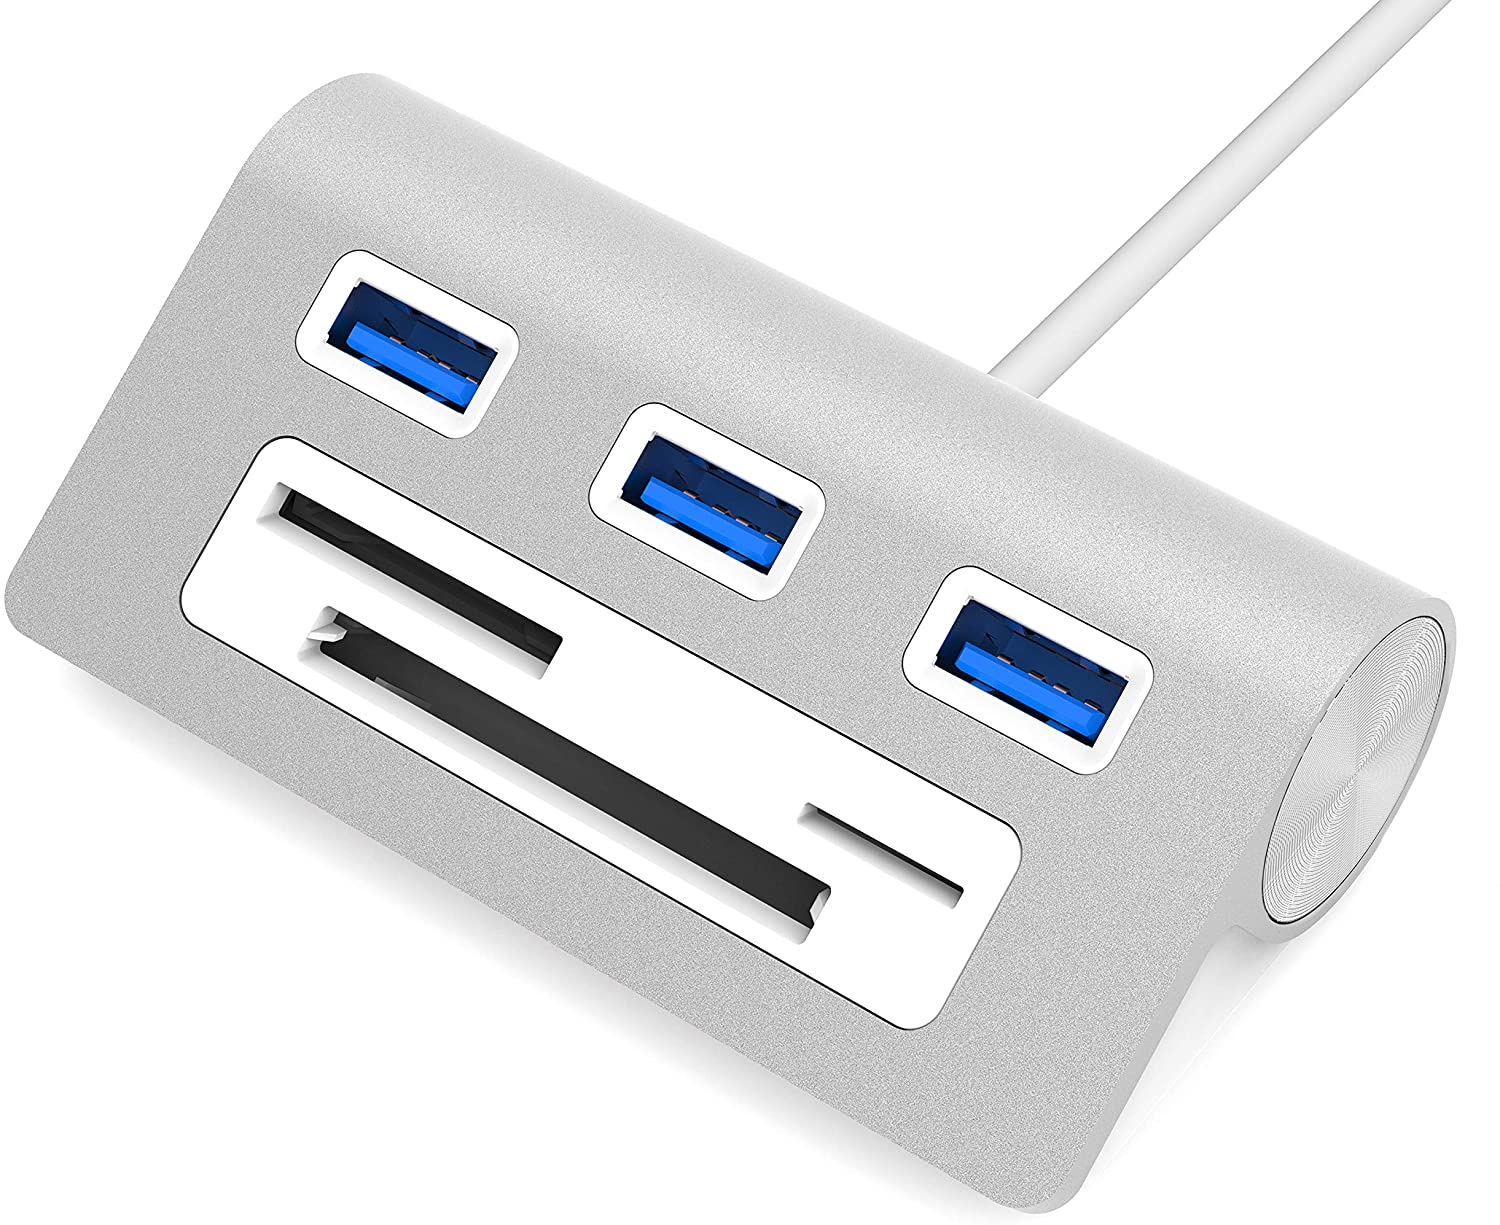 SABRENT Premium 3 Port Aluminum USB 3.0 Hub with Multi in 1 Card Reader (12" Cable) for iMac, All MacBooks, Mac Mini, or Any PC (HB-MACR)